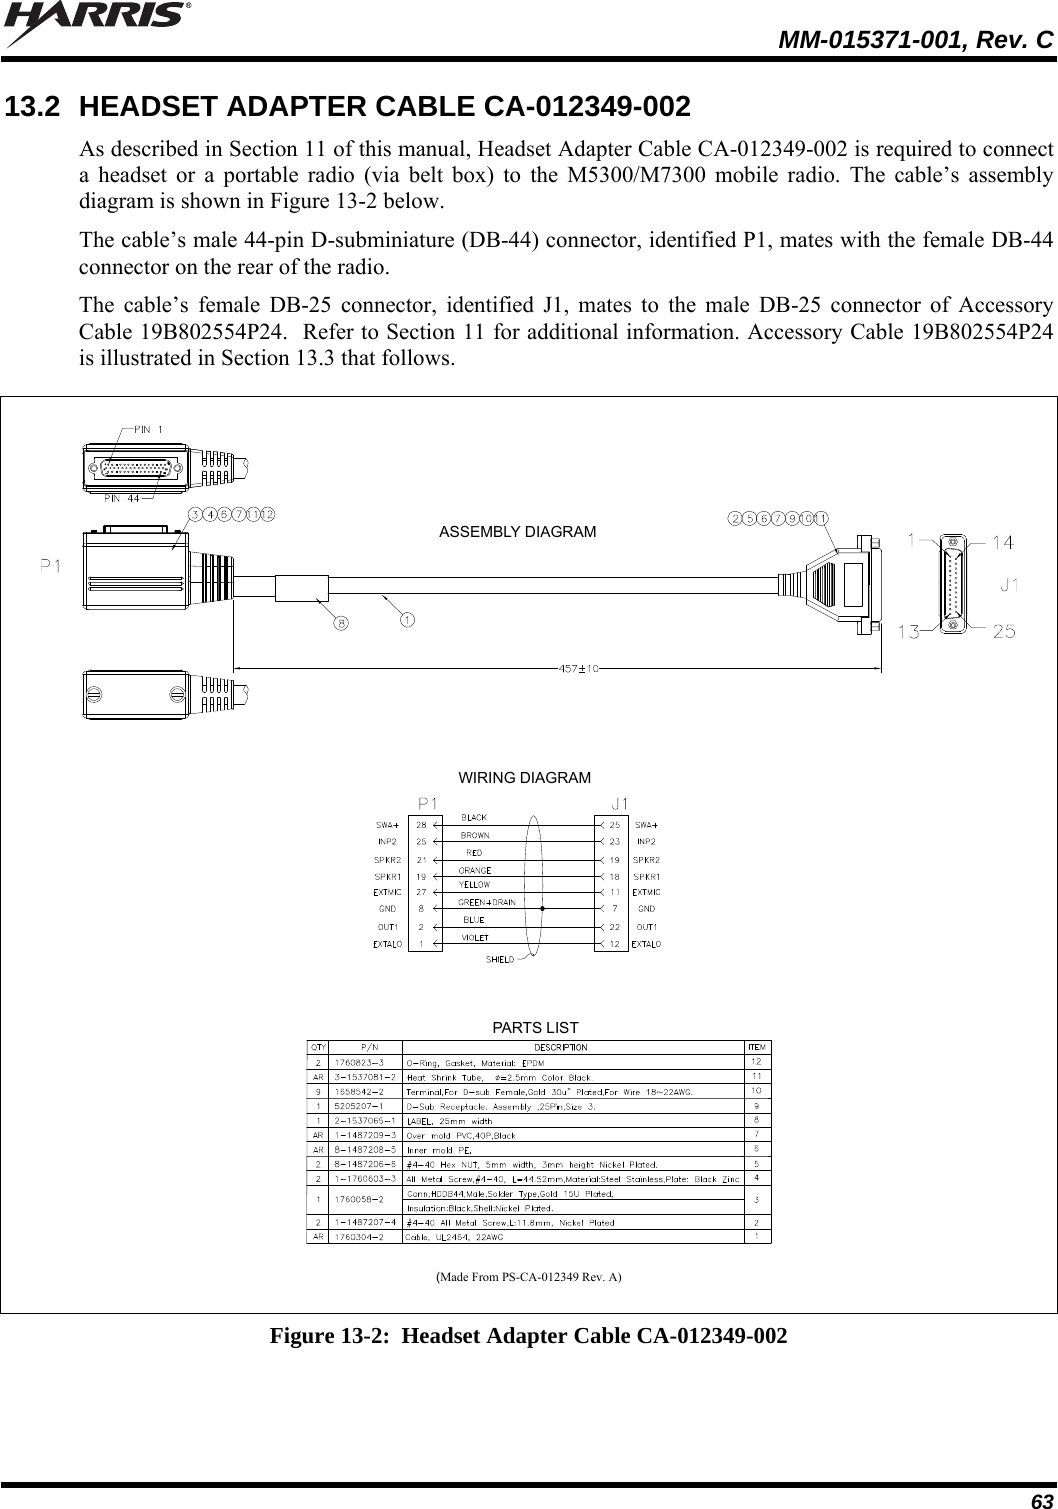   MM-015371-001, Rev. C 63 13.2  HEADSET ADAPTER CABLE CA-012349-002 As described in Section 11 of this manual, Headset Adapter Cable CA-012349-002 is required to connect a headset or a portable radio (via belt box) to the M5300/M7300 mobile radio. The cable’s assembly diagram is shown in Figure 13-2 below. The cable’s male 44-pin D-subminiature (DB-44) connector, identified P1, mates with the female DB-44 connector on the rear of the radio. The cable’s female DB-25 connector, identified J1, mates to the male DB-25 connector of Accessory Cable 19B802554P24.  Refer to Section 11 for additional information. Accessory Cable 19B802554P24 is illustrated in Section 13.3 that follows.  ASSEMBLY DIAGRAMWIRING DIAGRAMPARTS LIST  (Made From PS-CA-012349 Rev. A)  Figure 13-2:  Headset Adapter Cable CA-012349-002  